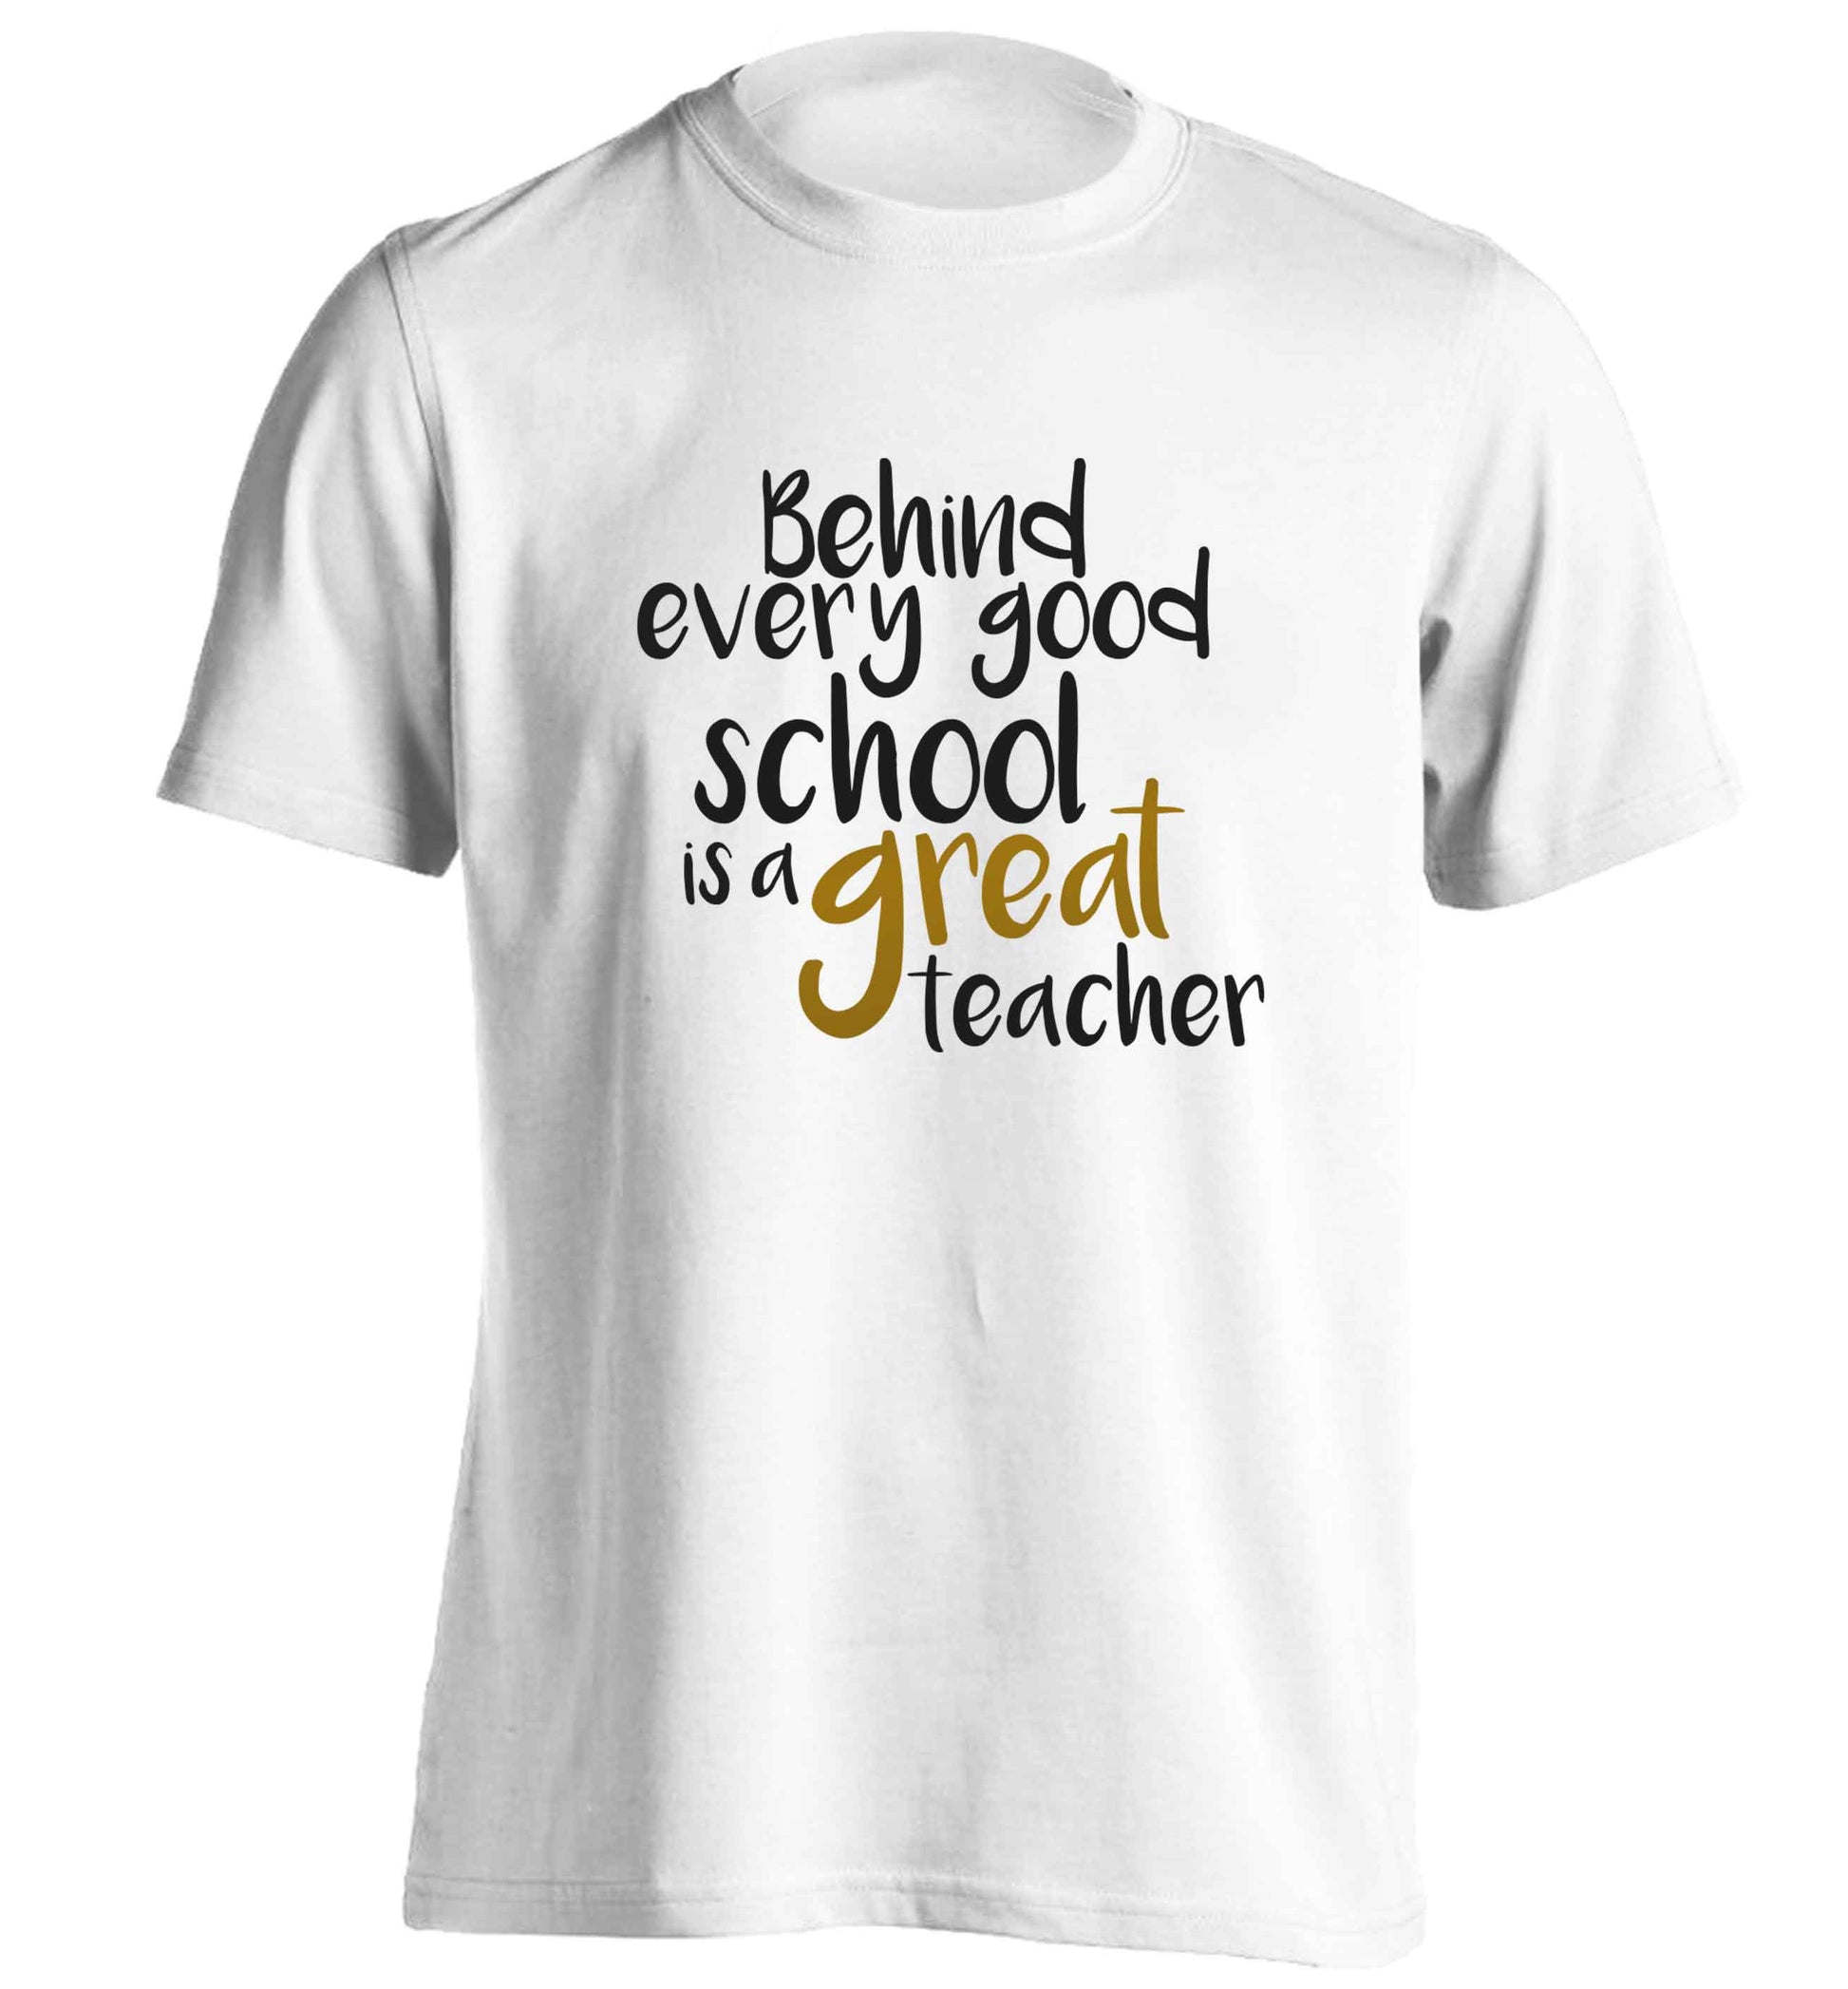 Behind every good school is a great teacher adults unisex white Tshirt 2XL